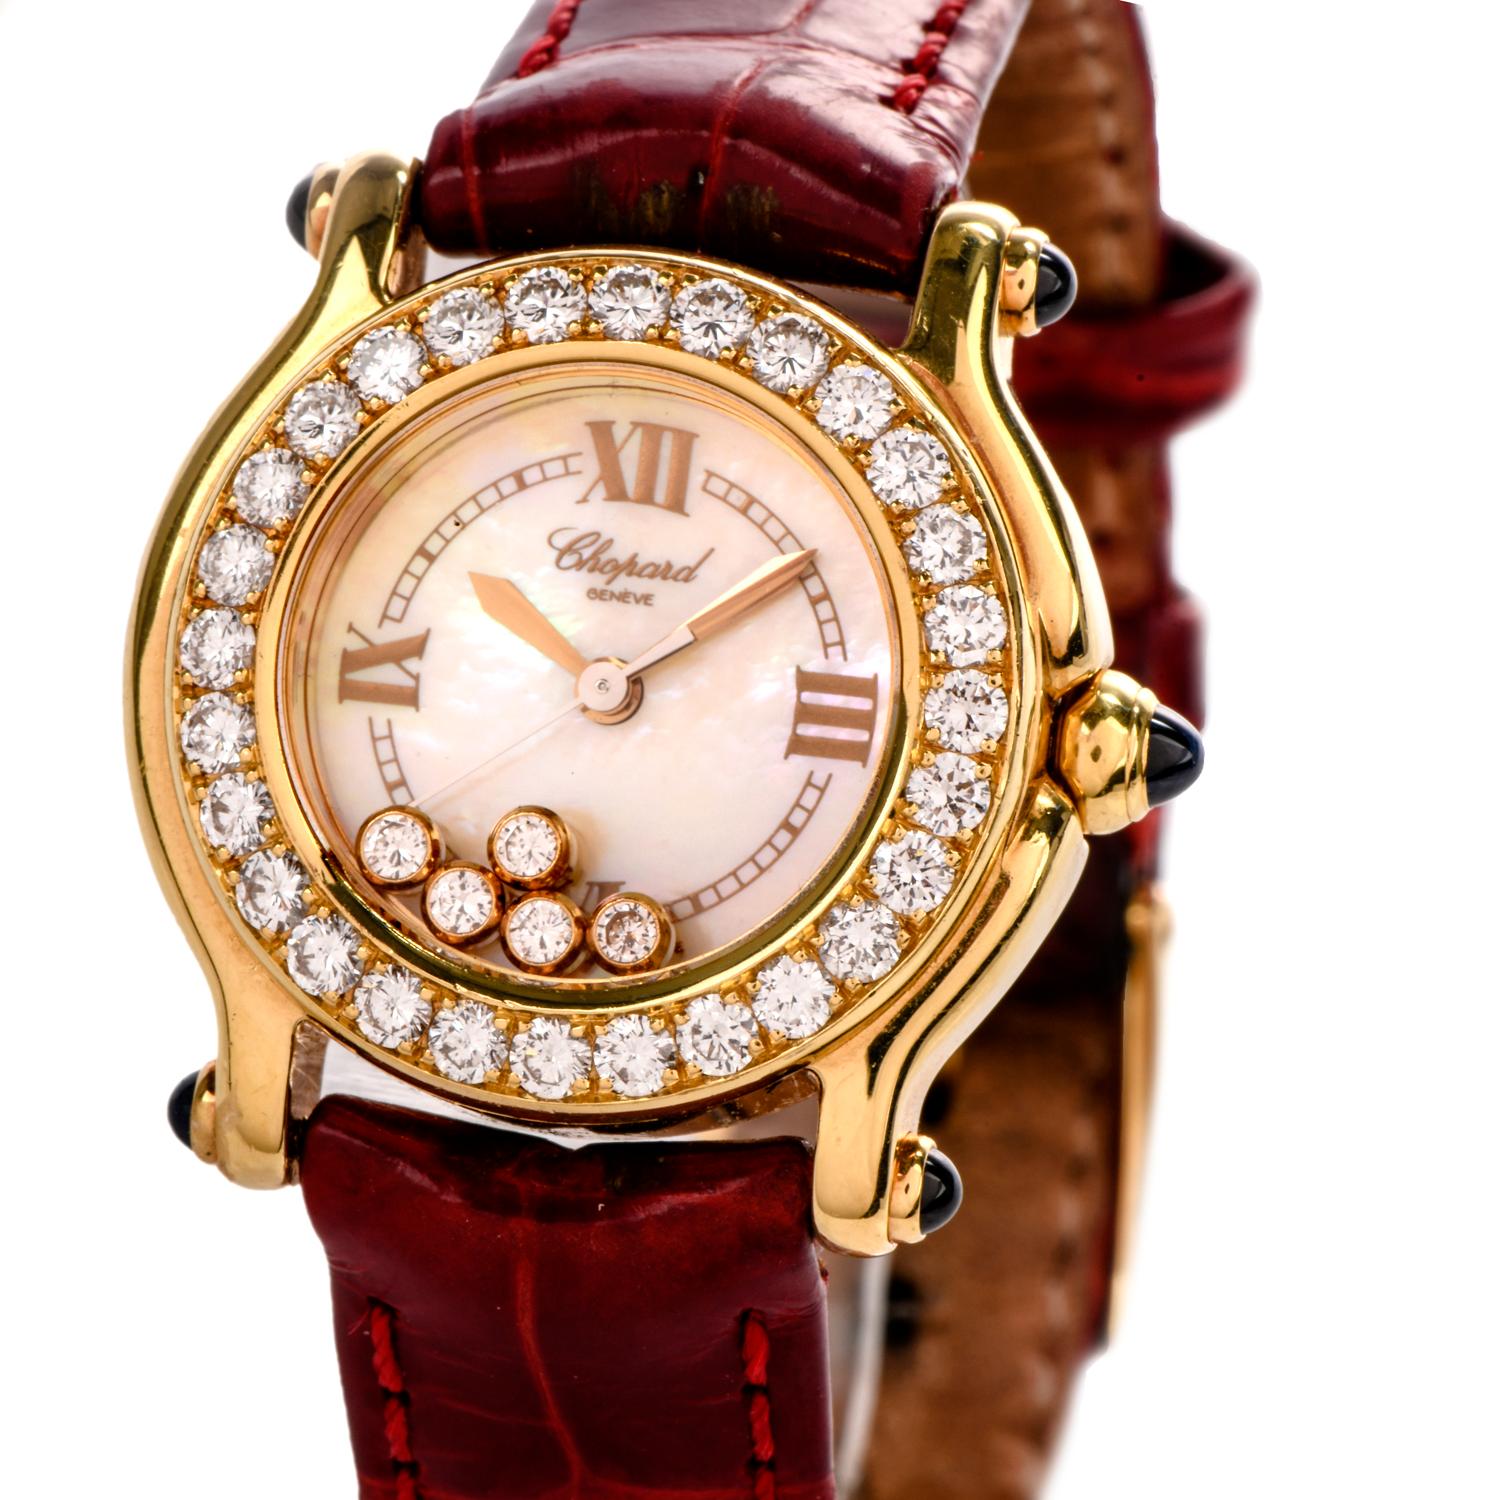 Pristine Preowned Ladies 26mm Chopard Happy Sport  Diamond watch was crafted in 18K gold.

Solid gold casing with cabachon Sapphire lugs and crown tip.  Mother of Pearl dial 

with 5 floating diamonds and Diamond Bezel. Quartz movement.

Burgandy